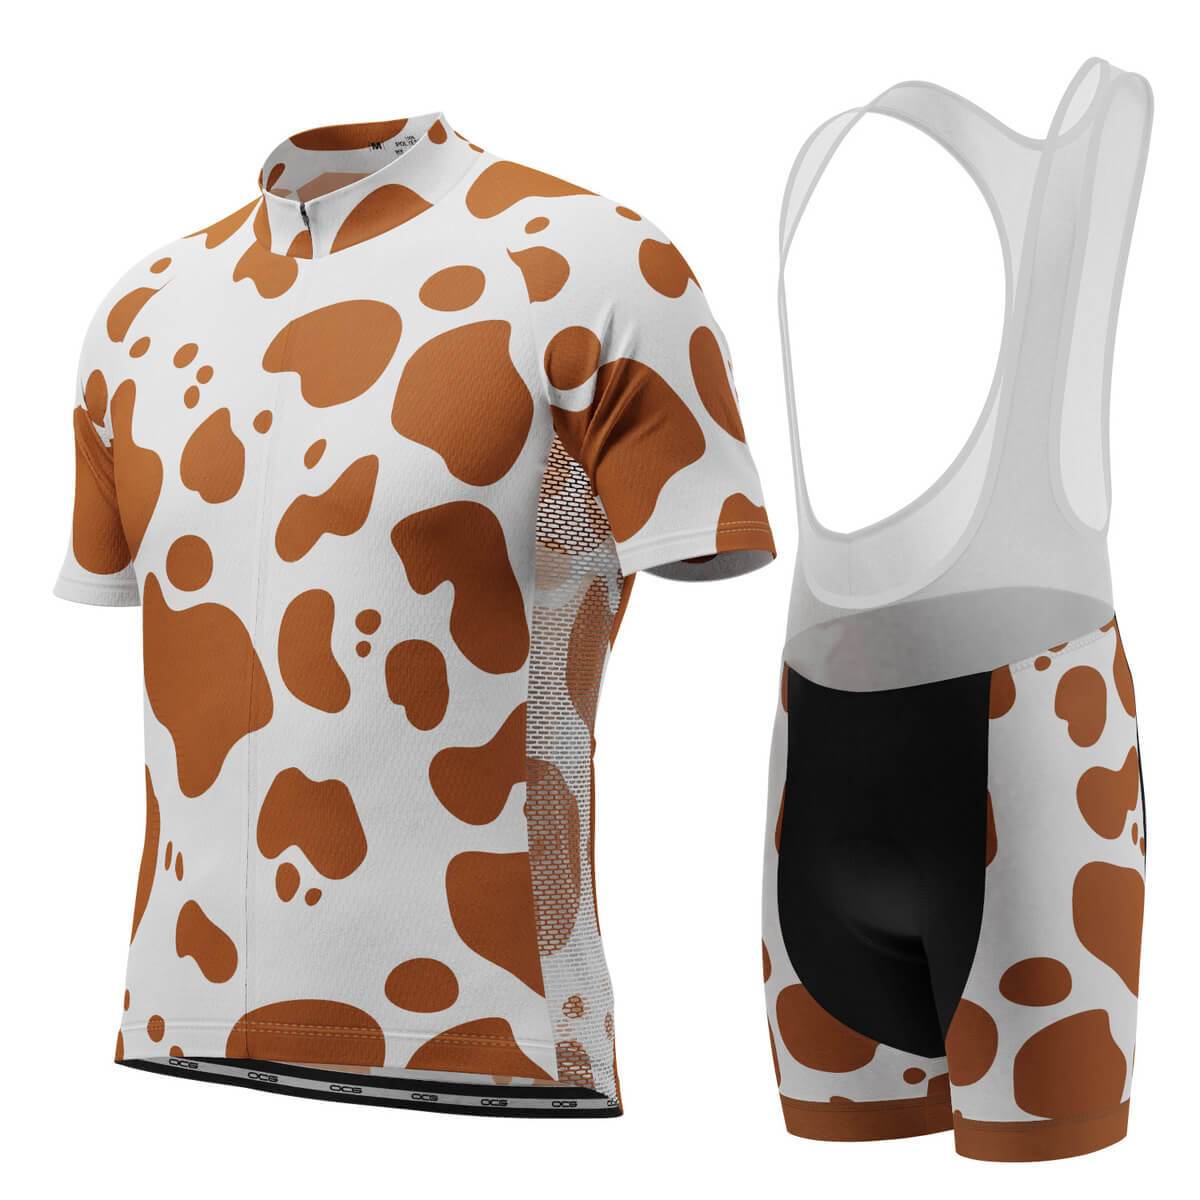 Men's Jersey Cow Short Sleeve Cycling Kit